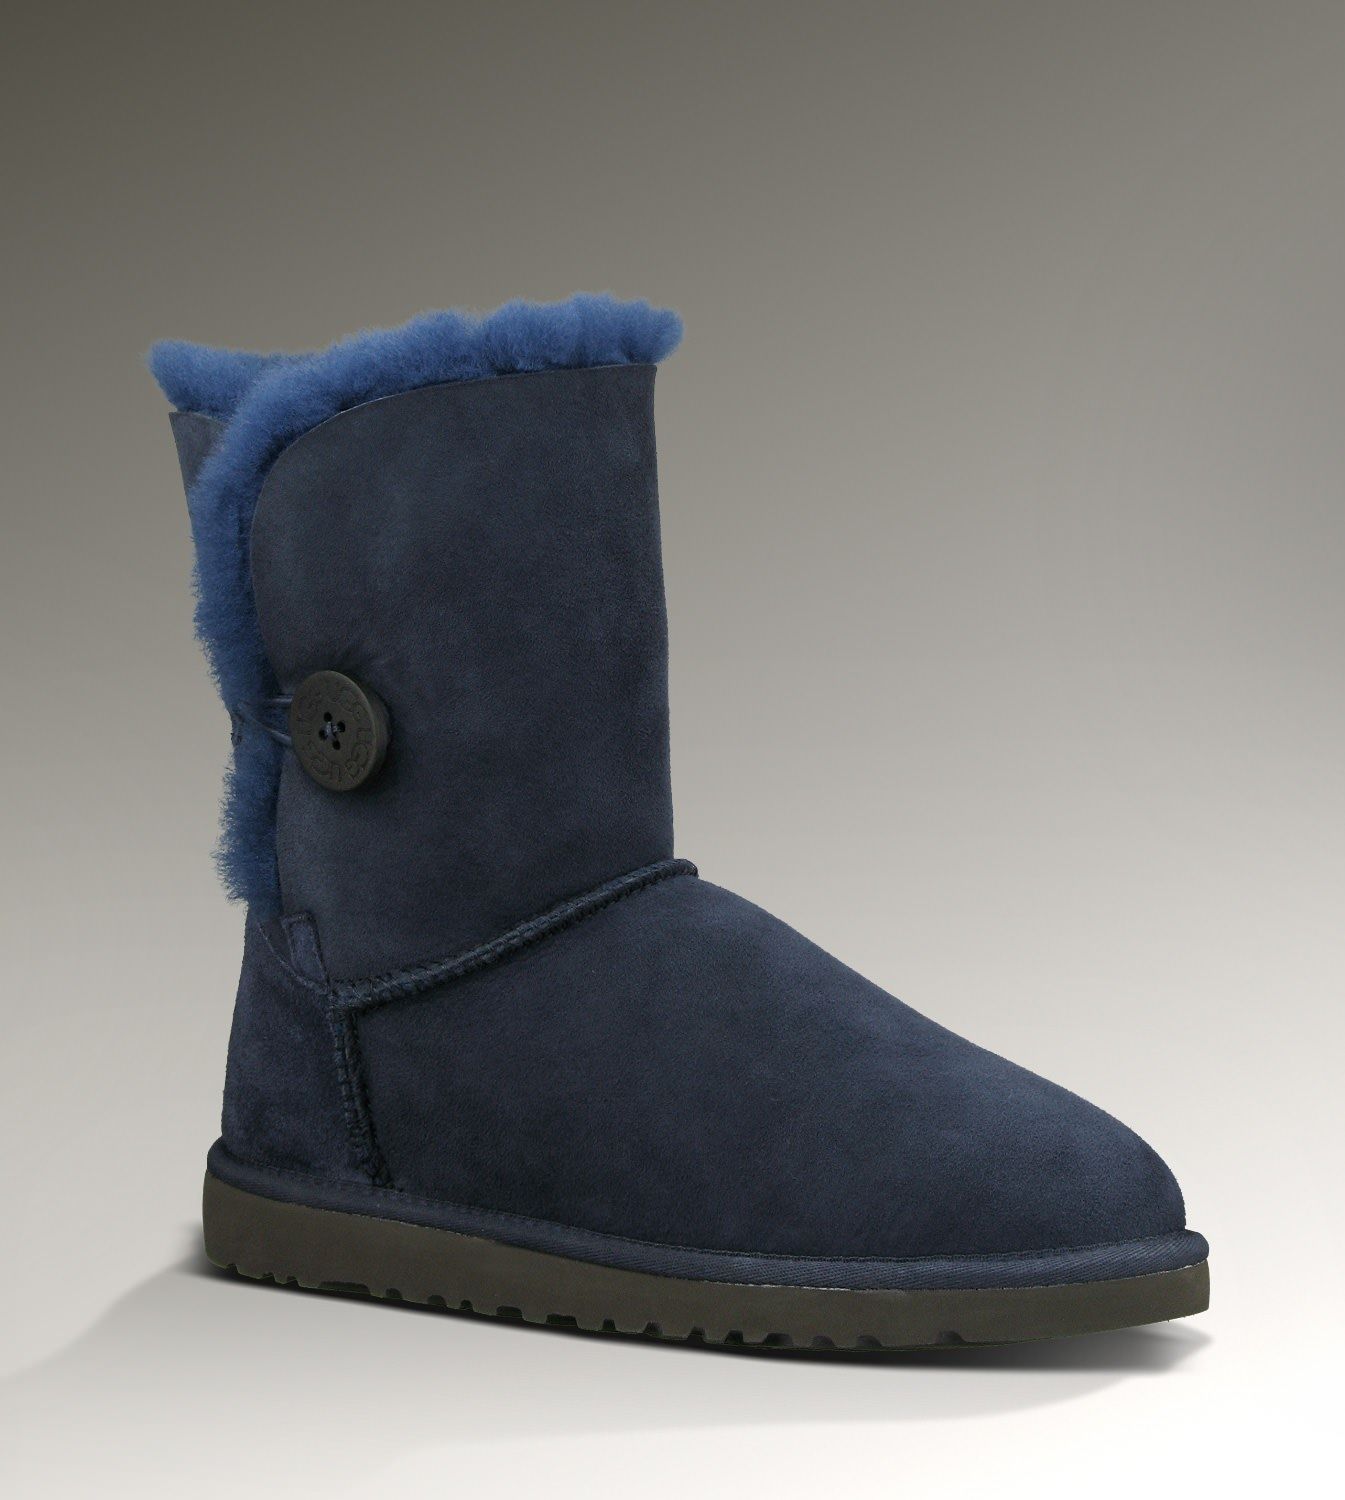 Ugg Womens Bailey Button Navy! UGG Boots Cheap Sale!